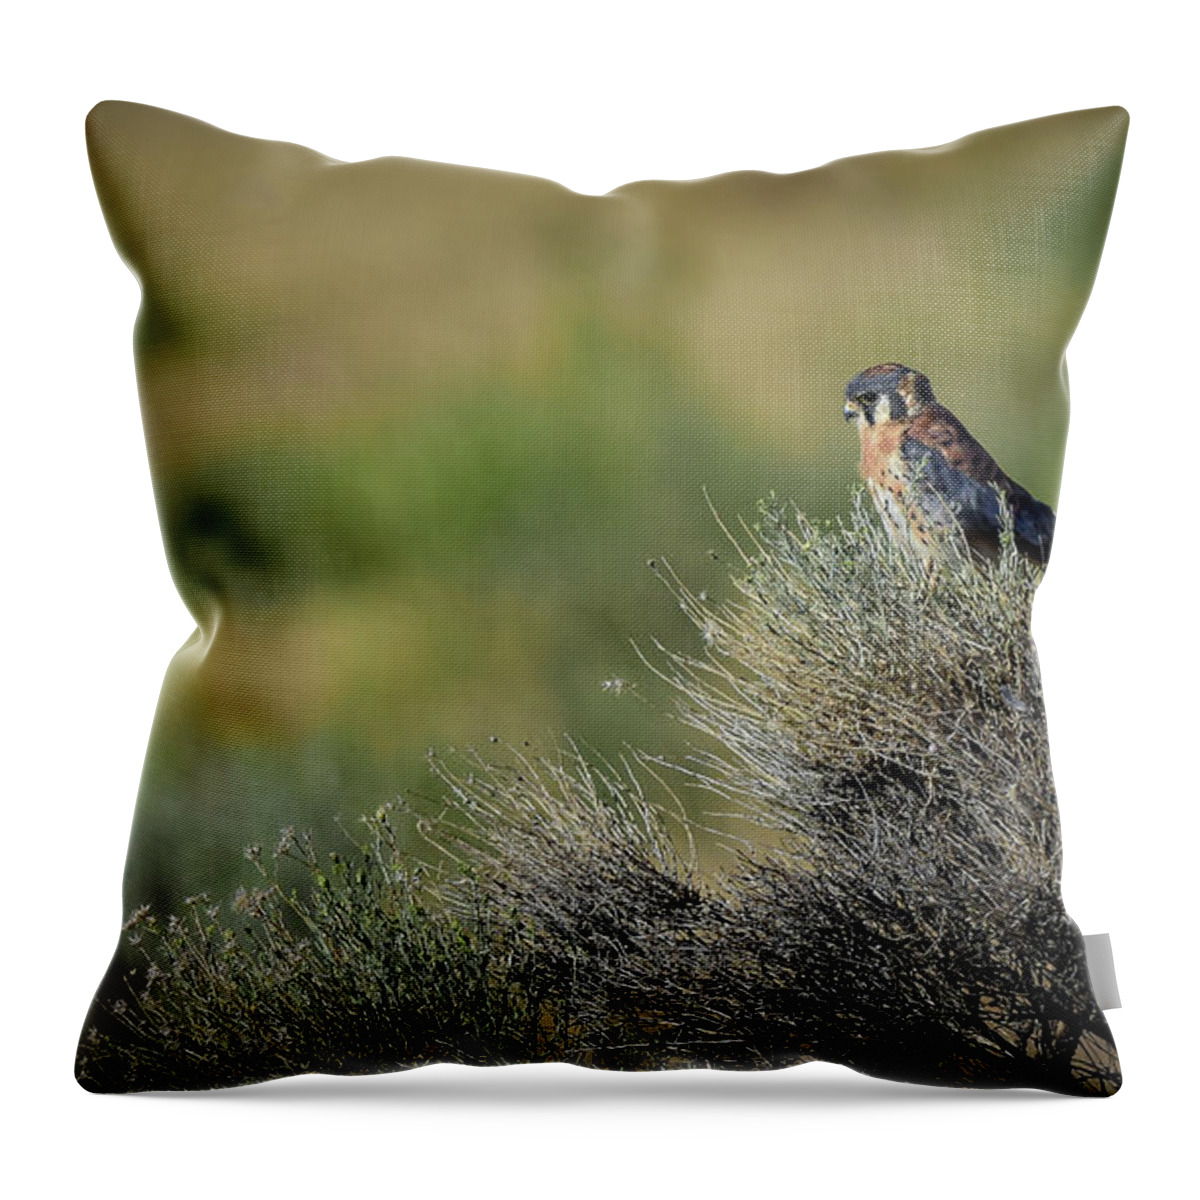 Kestrel Throw Pillow featuring the photograph American Kestrel 2 by Rick Mosher